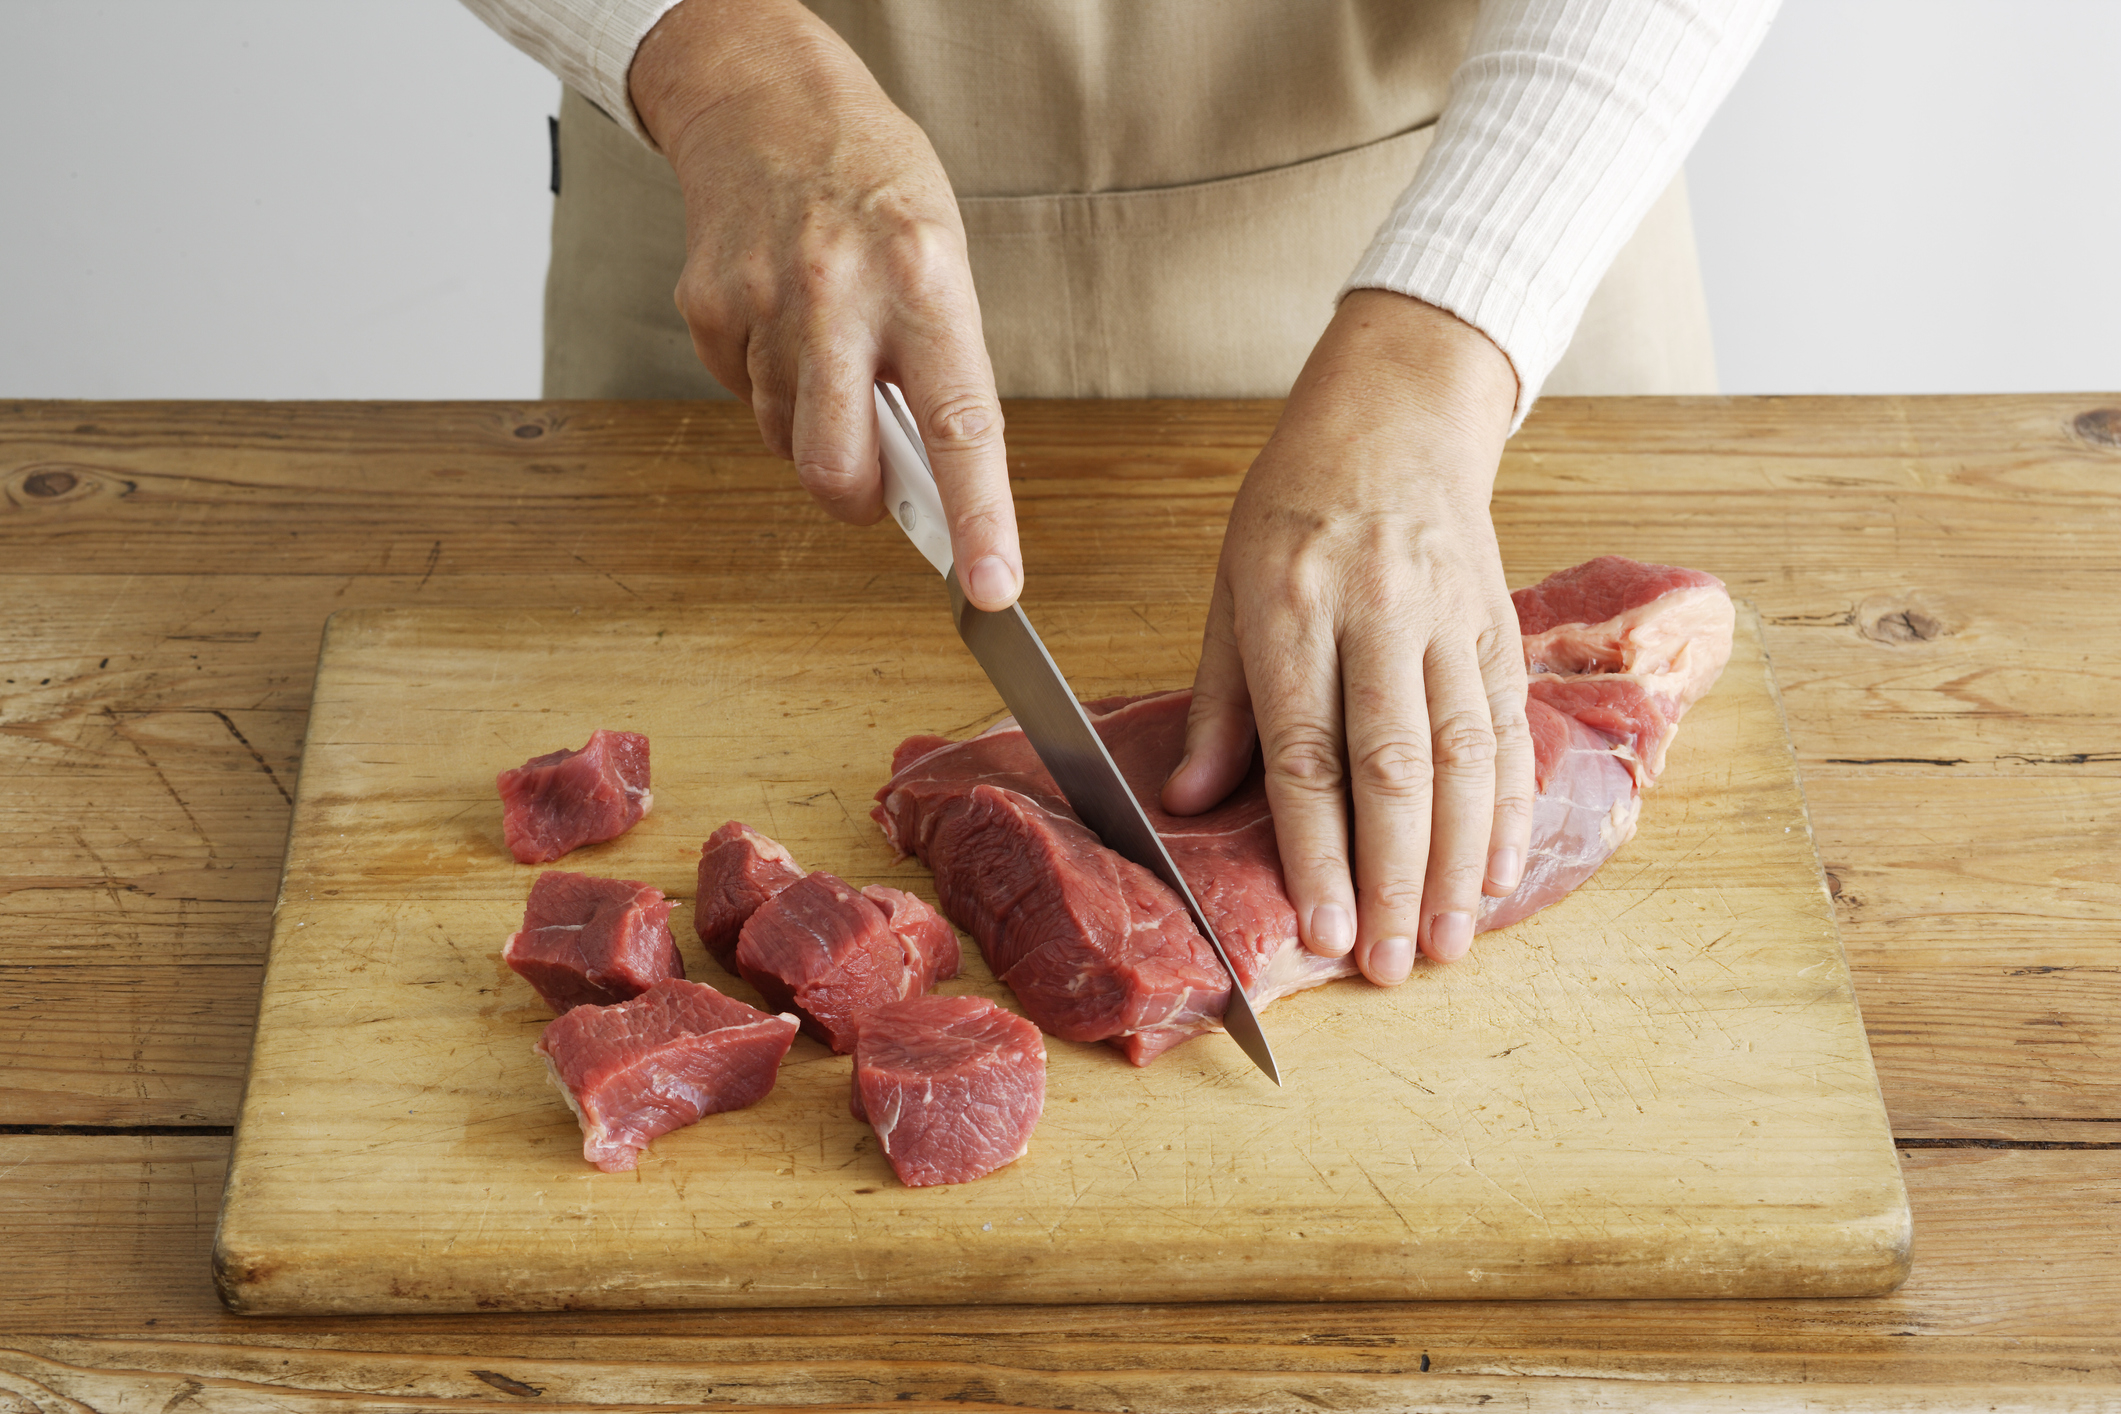 Someone cutting raw meat on a wooden cutting board